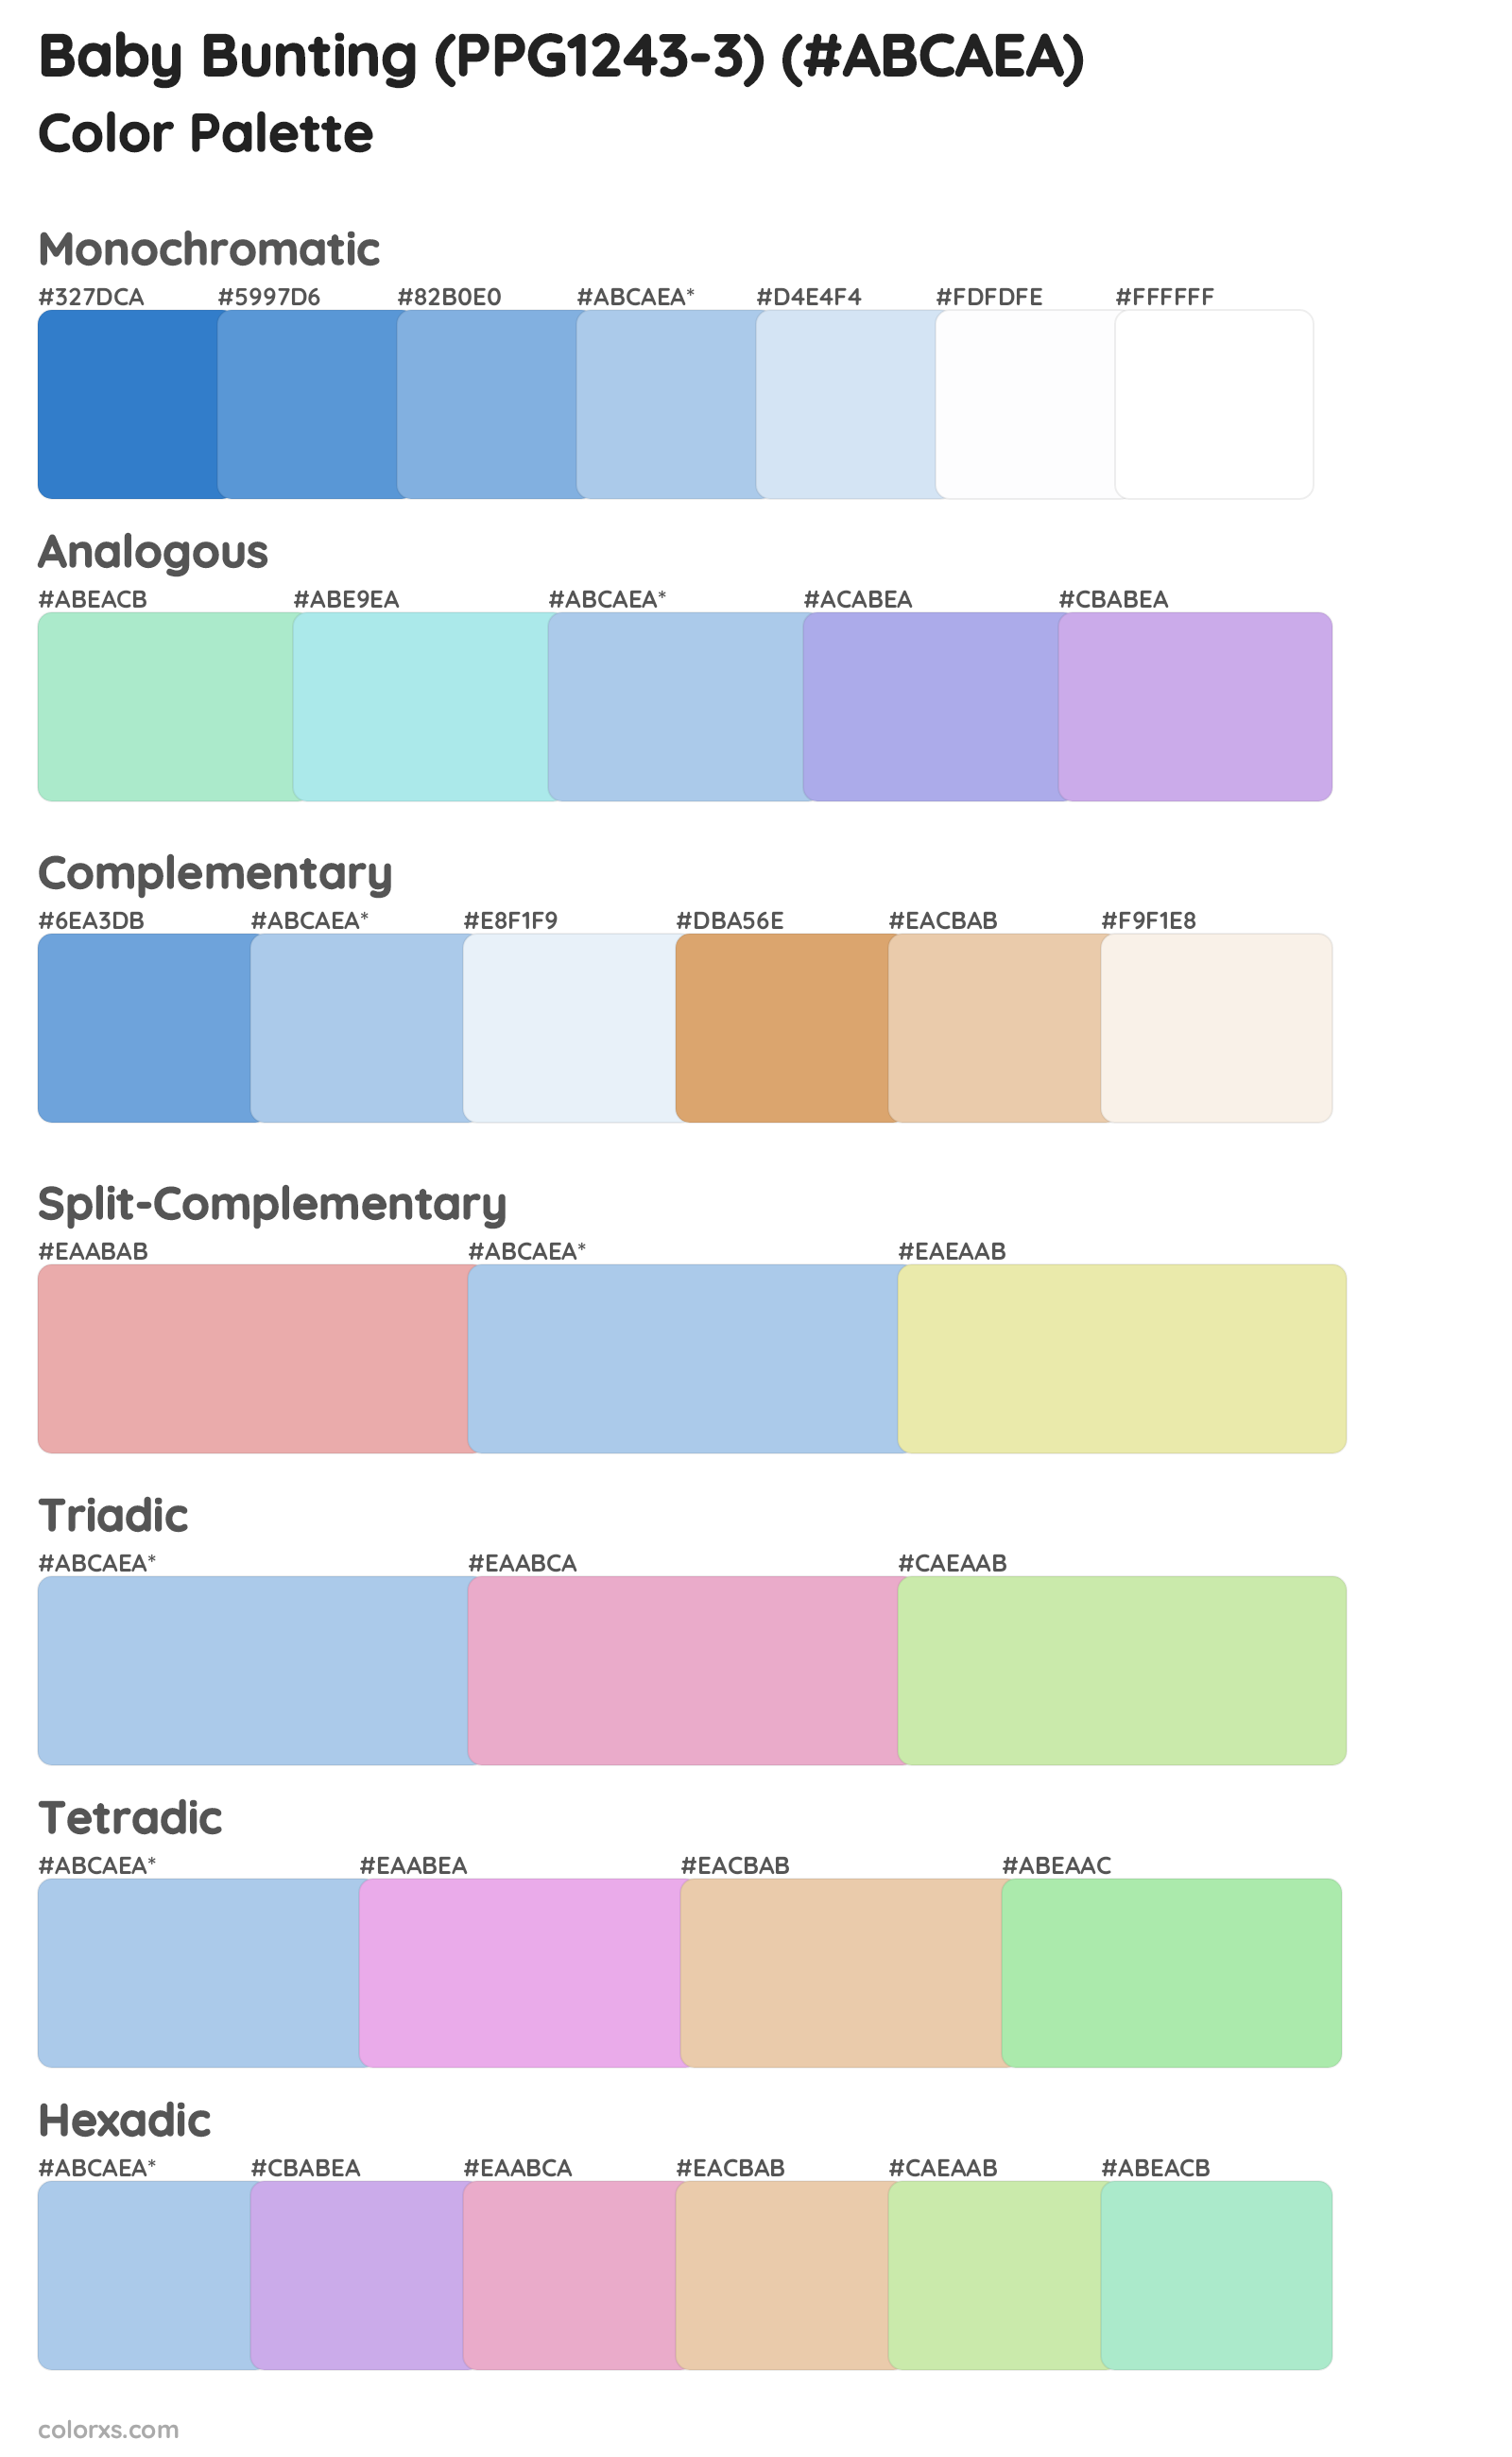 Baby Bunting (PPG1243-3) Color Scheme Palettes